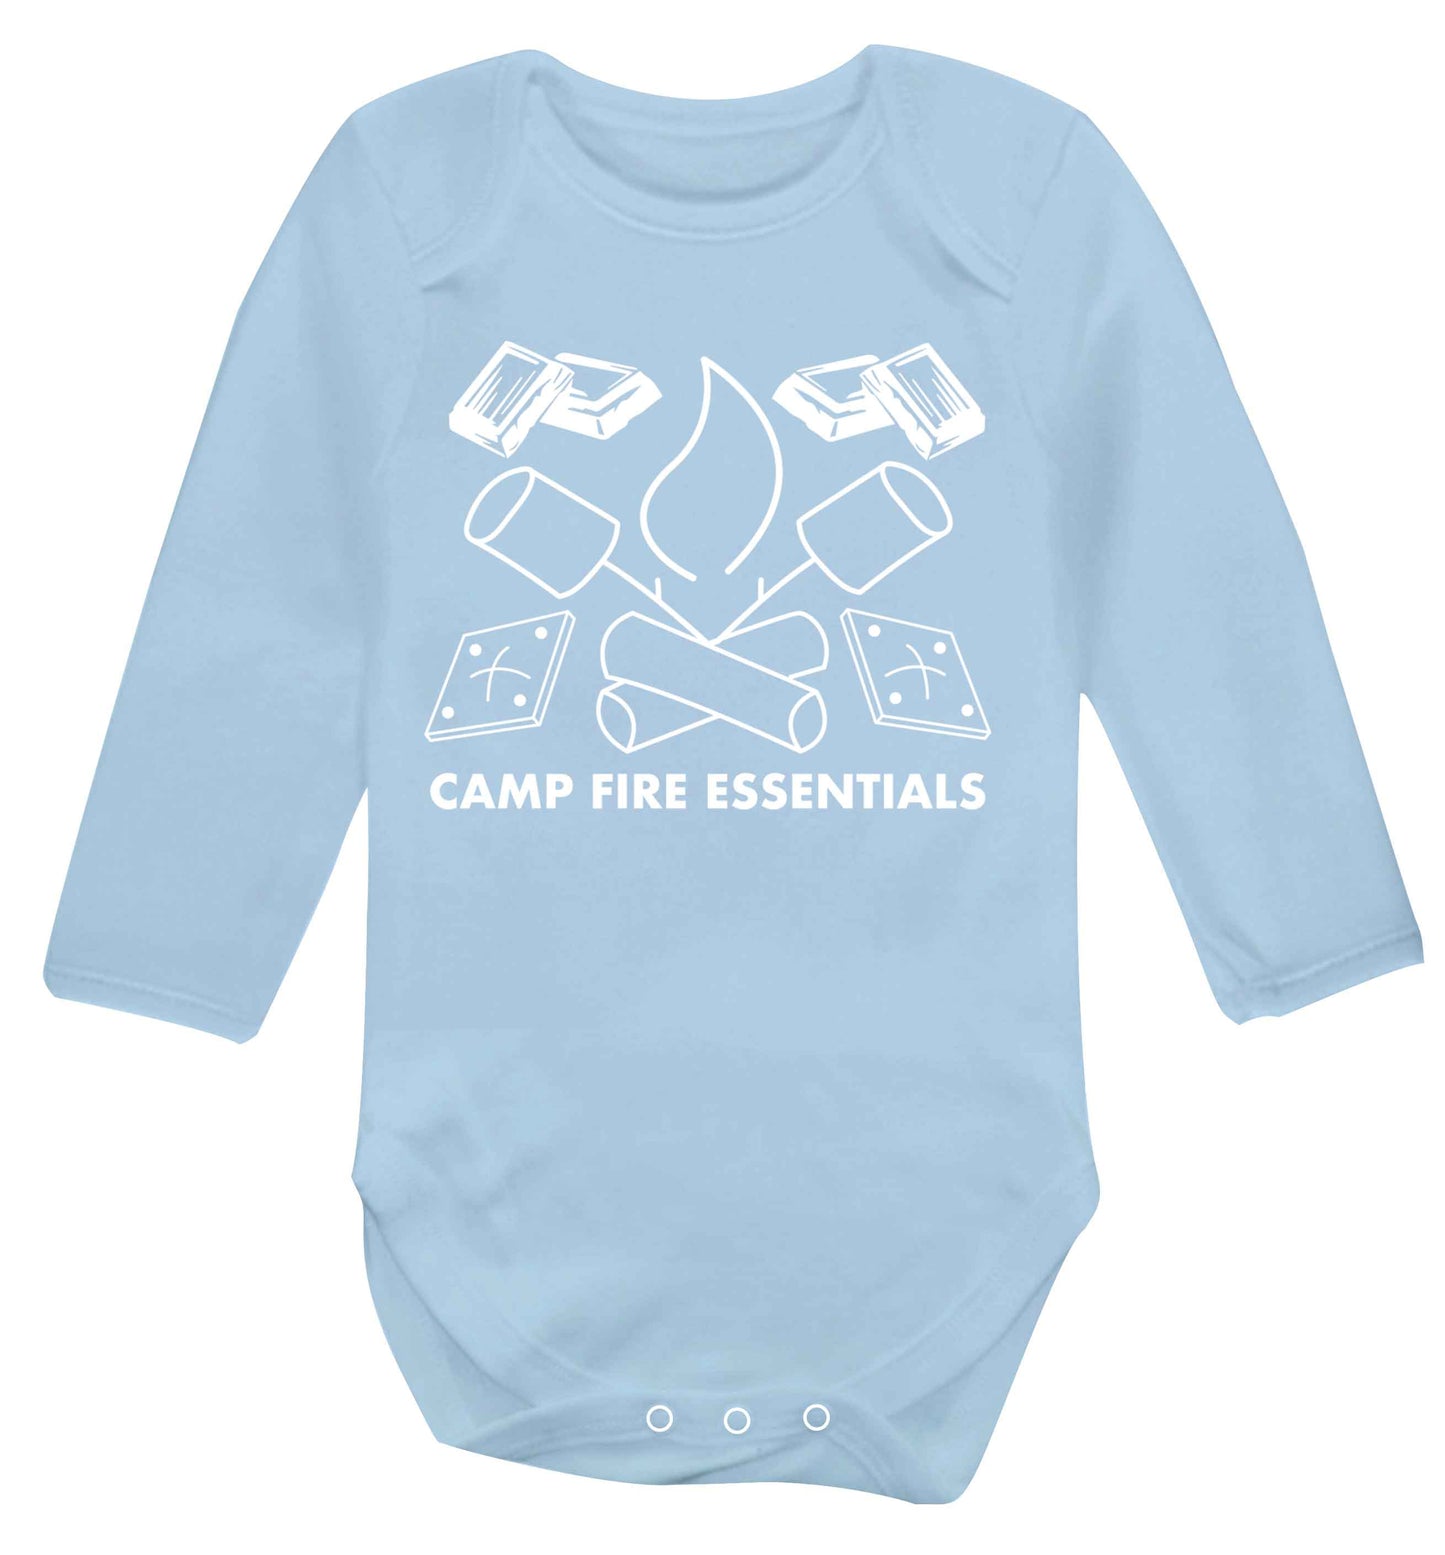 Campfire essentials Baby Vest long sleeved pale blue 6-12 months